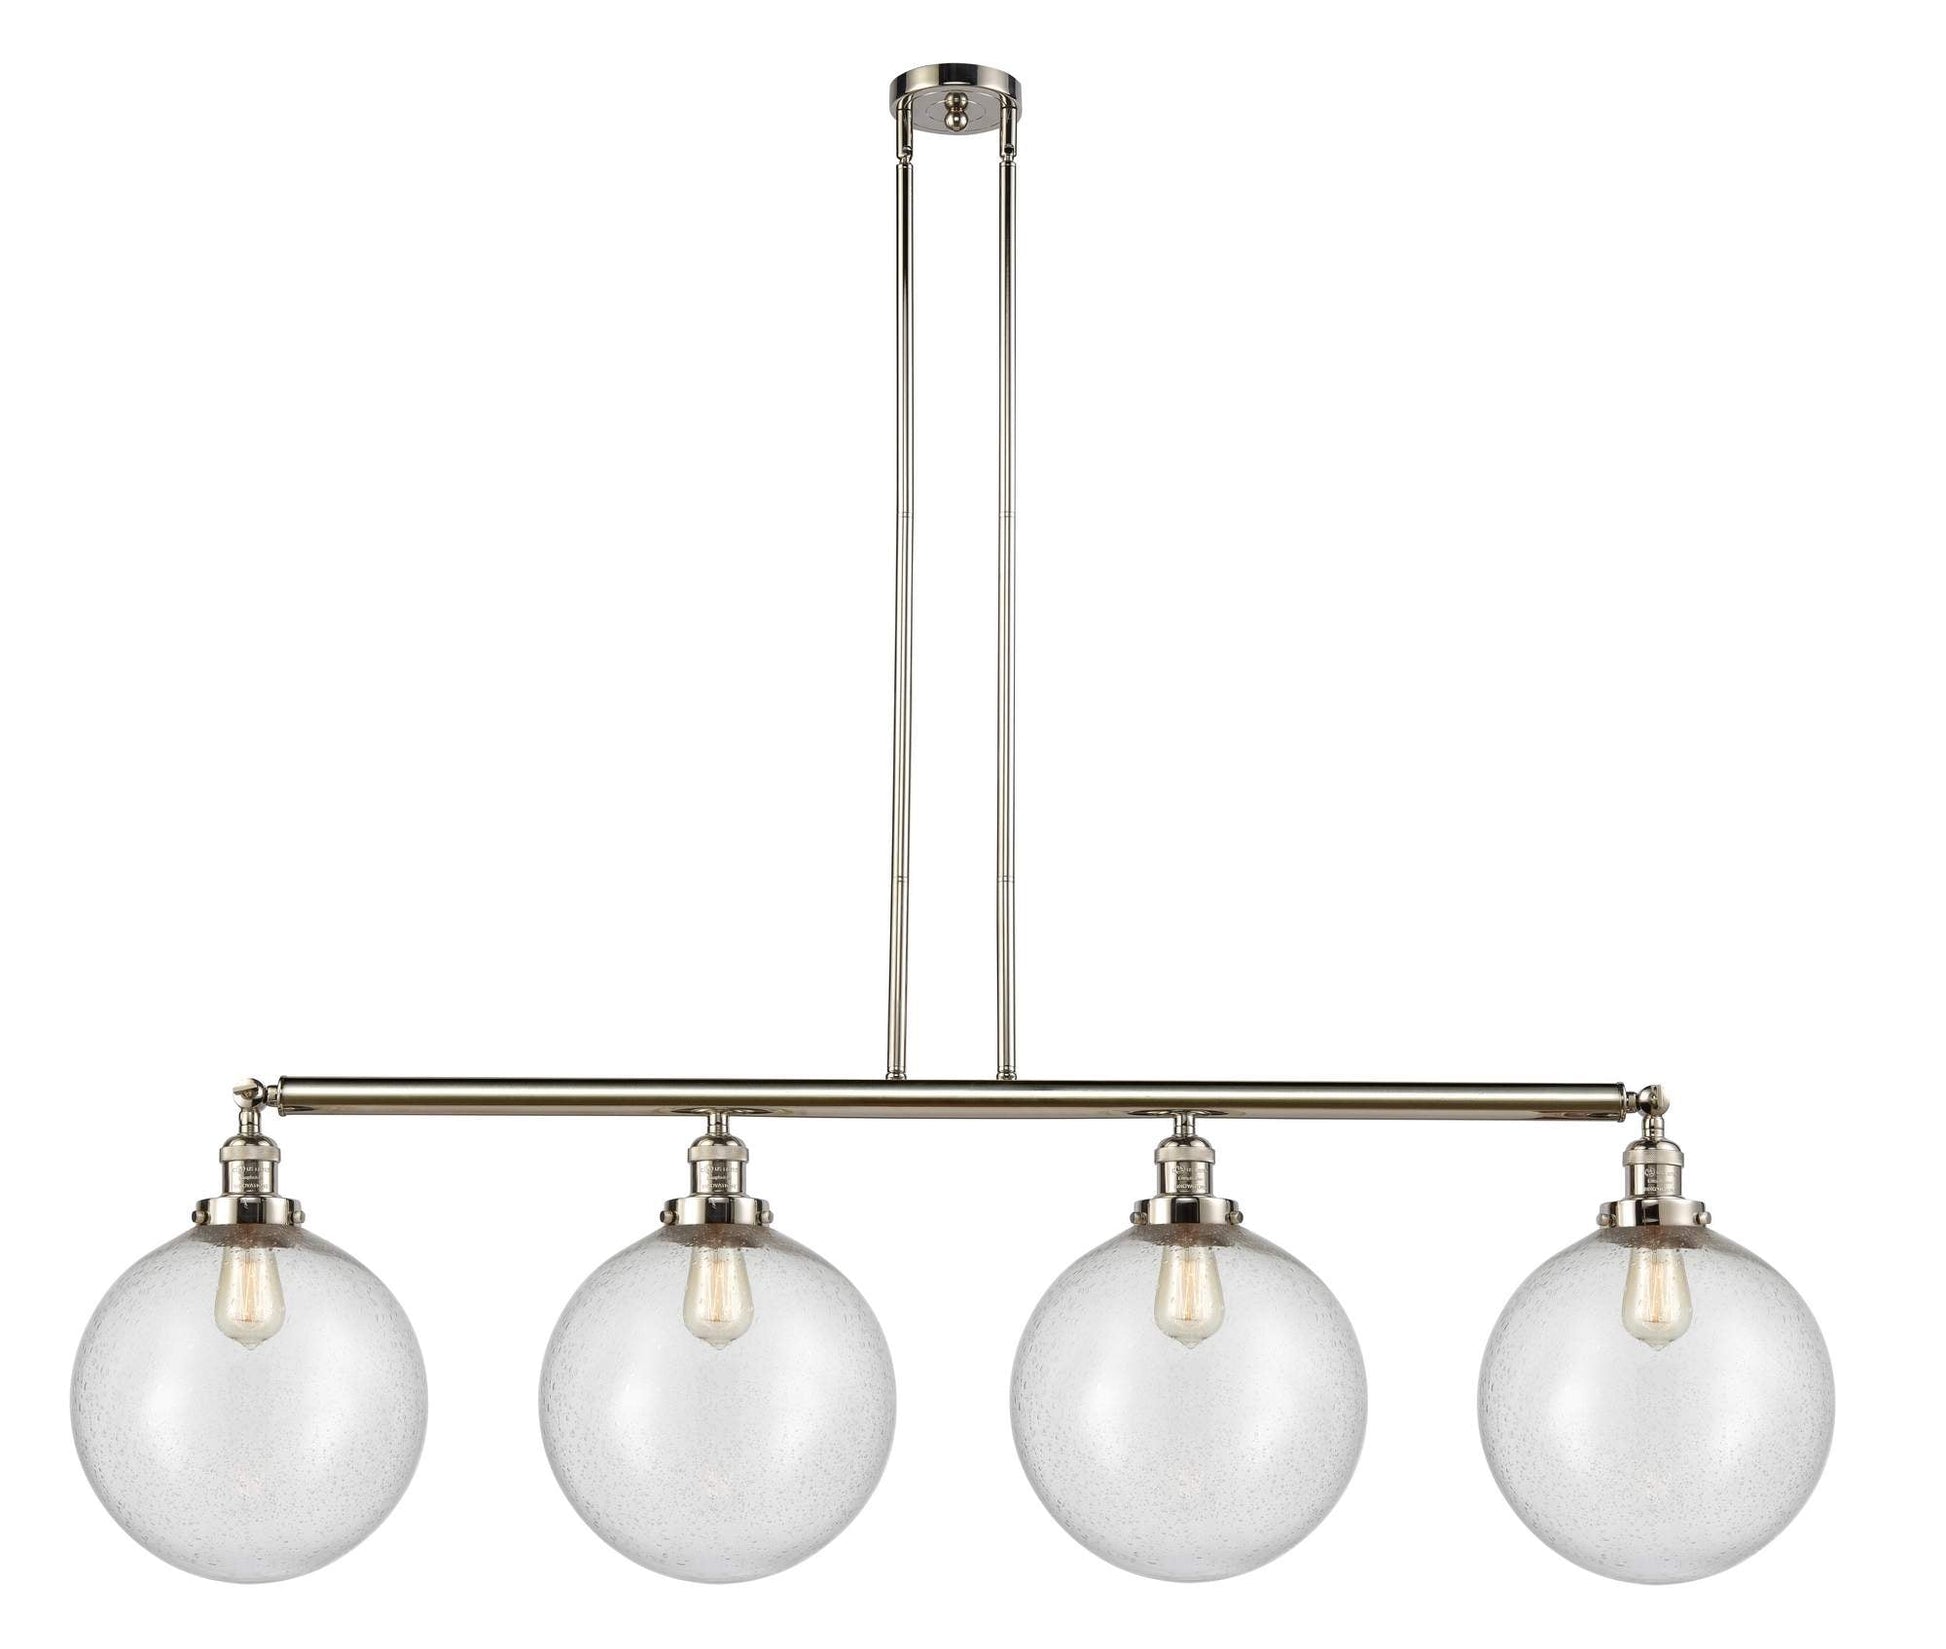 Innovations Lighting 214-PN-G204-12-LED 4-Light 56" Polished Nickel Island Light - Seedy Beacon Glass Shade - Dimmable Vintage LED LED Bulbs Included - Width: 56" Depth (Front to Back): 12" Height: 16 - Maximum  Height With Cord Or Stems:  50" - Minimum H